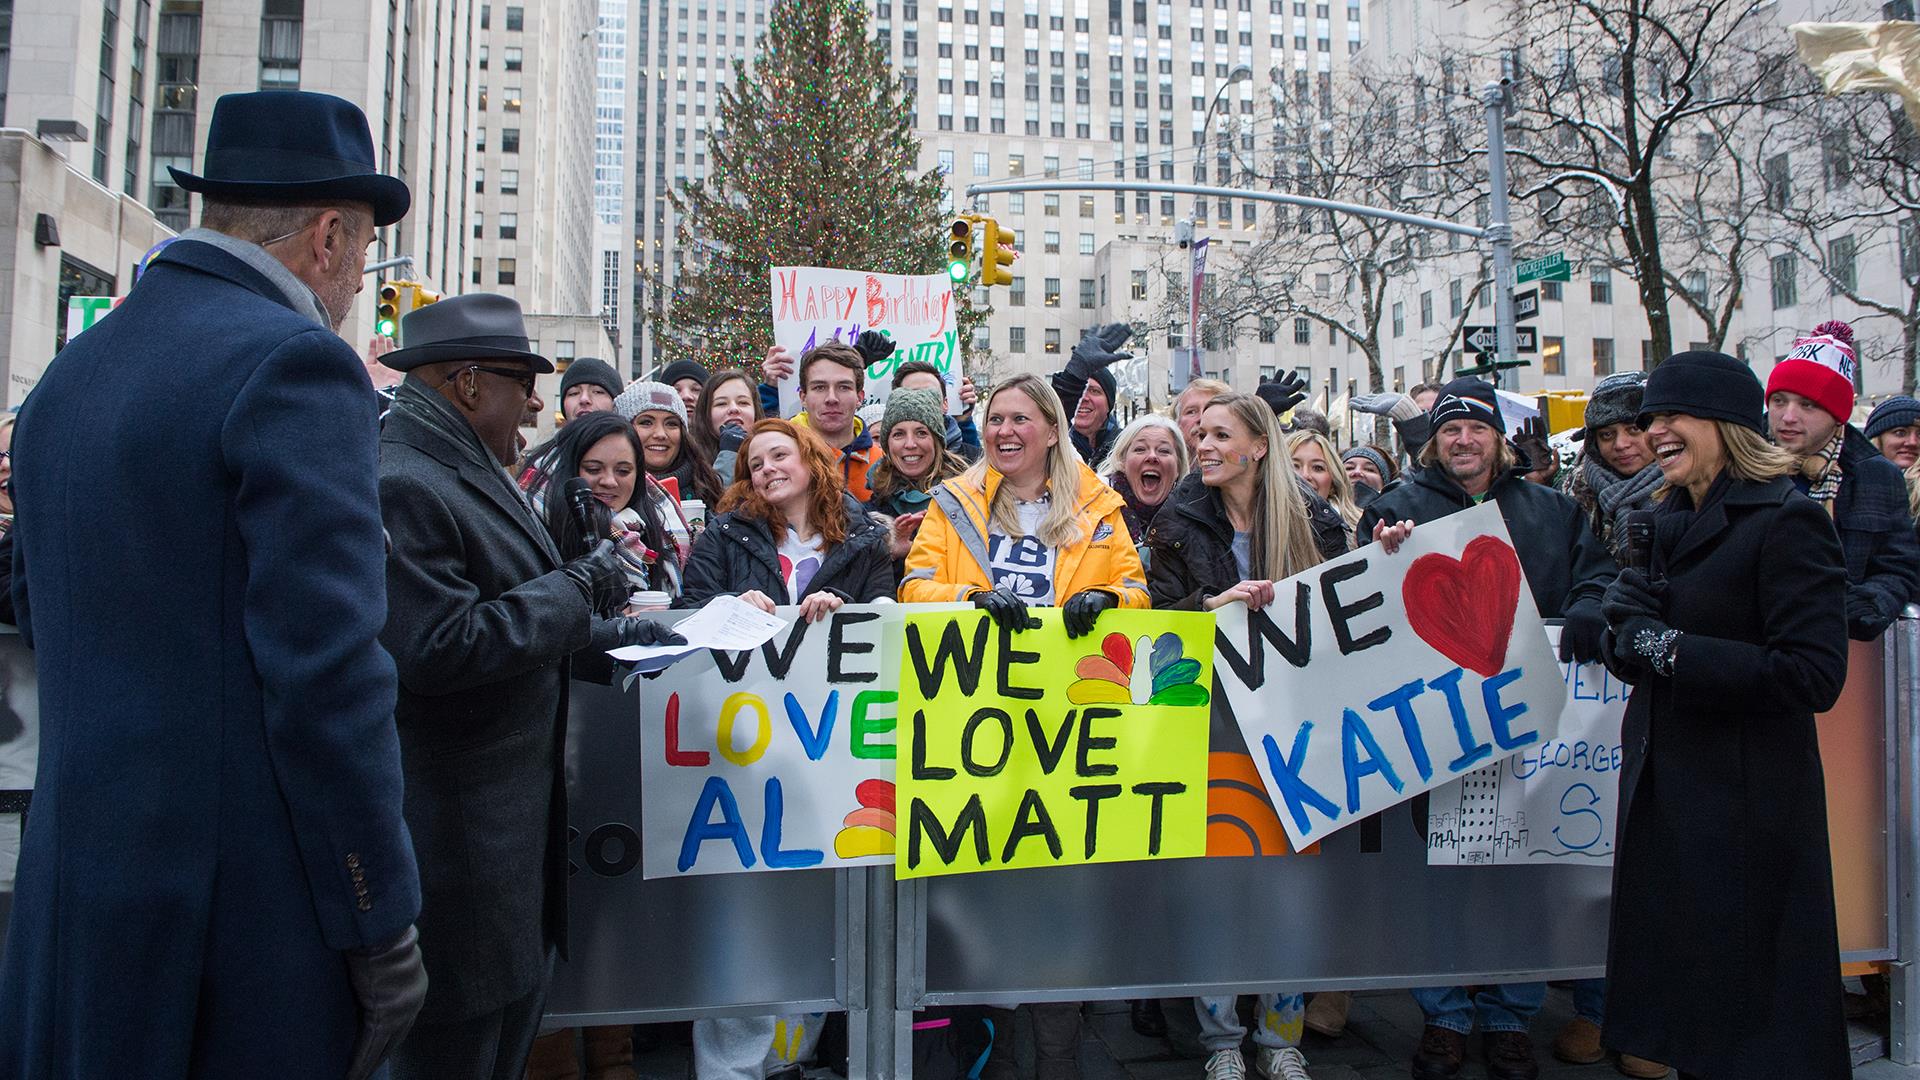 After 19 years, TODAY superfans return for Matt Lauer's 20th anniversary